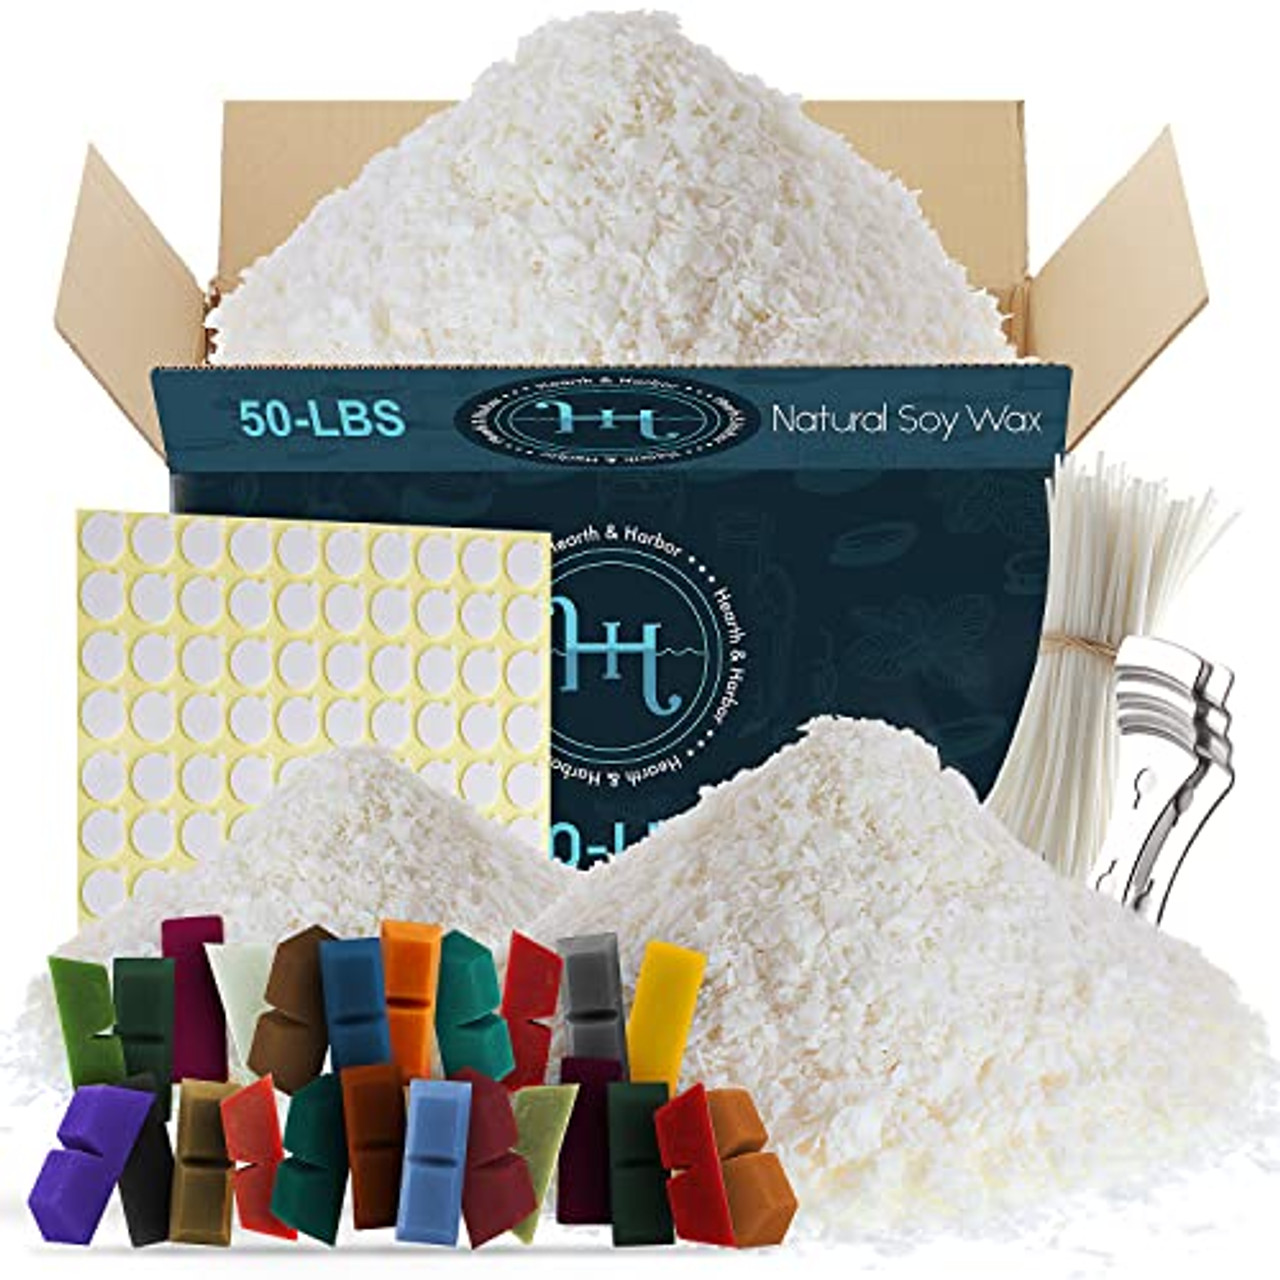 Natural Soy Wax and DIY Candle Making Supplies - 50 Lbs Soy Candle Wax  Flakes, 24 Candle Wax Dye Blocks, 500 Cotton Wicks, and 10 Metal Centering  Device